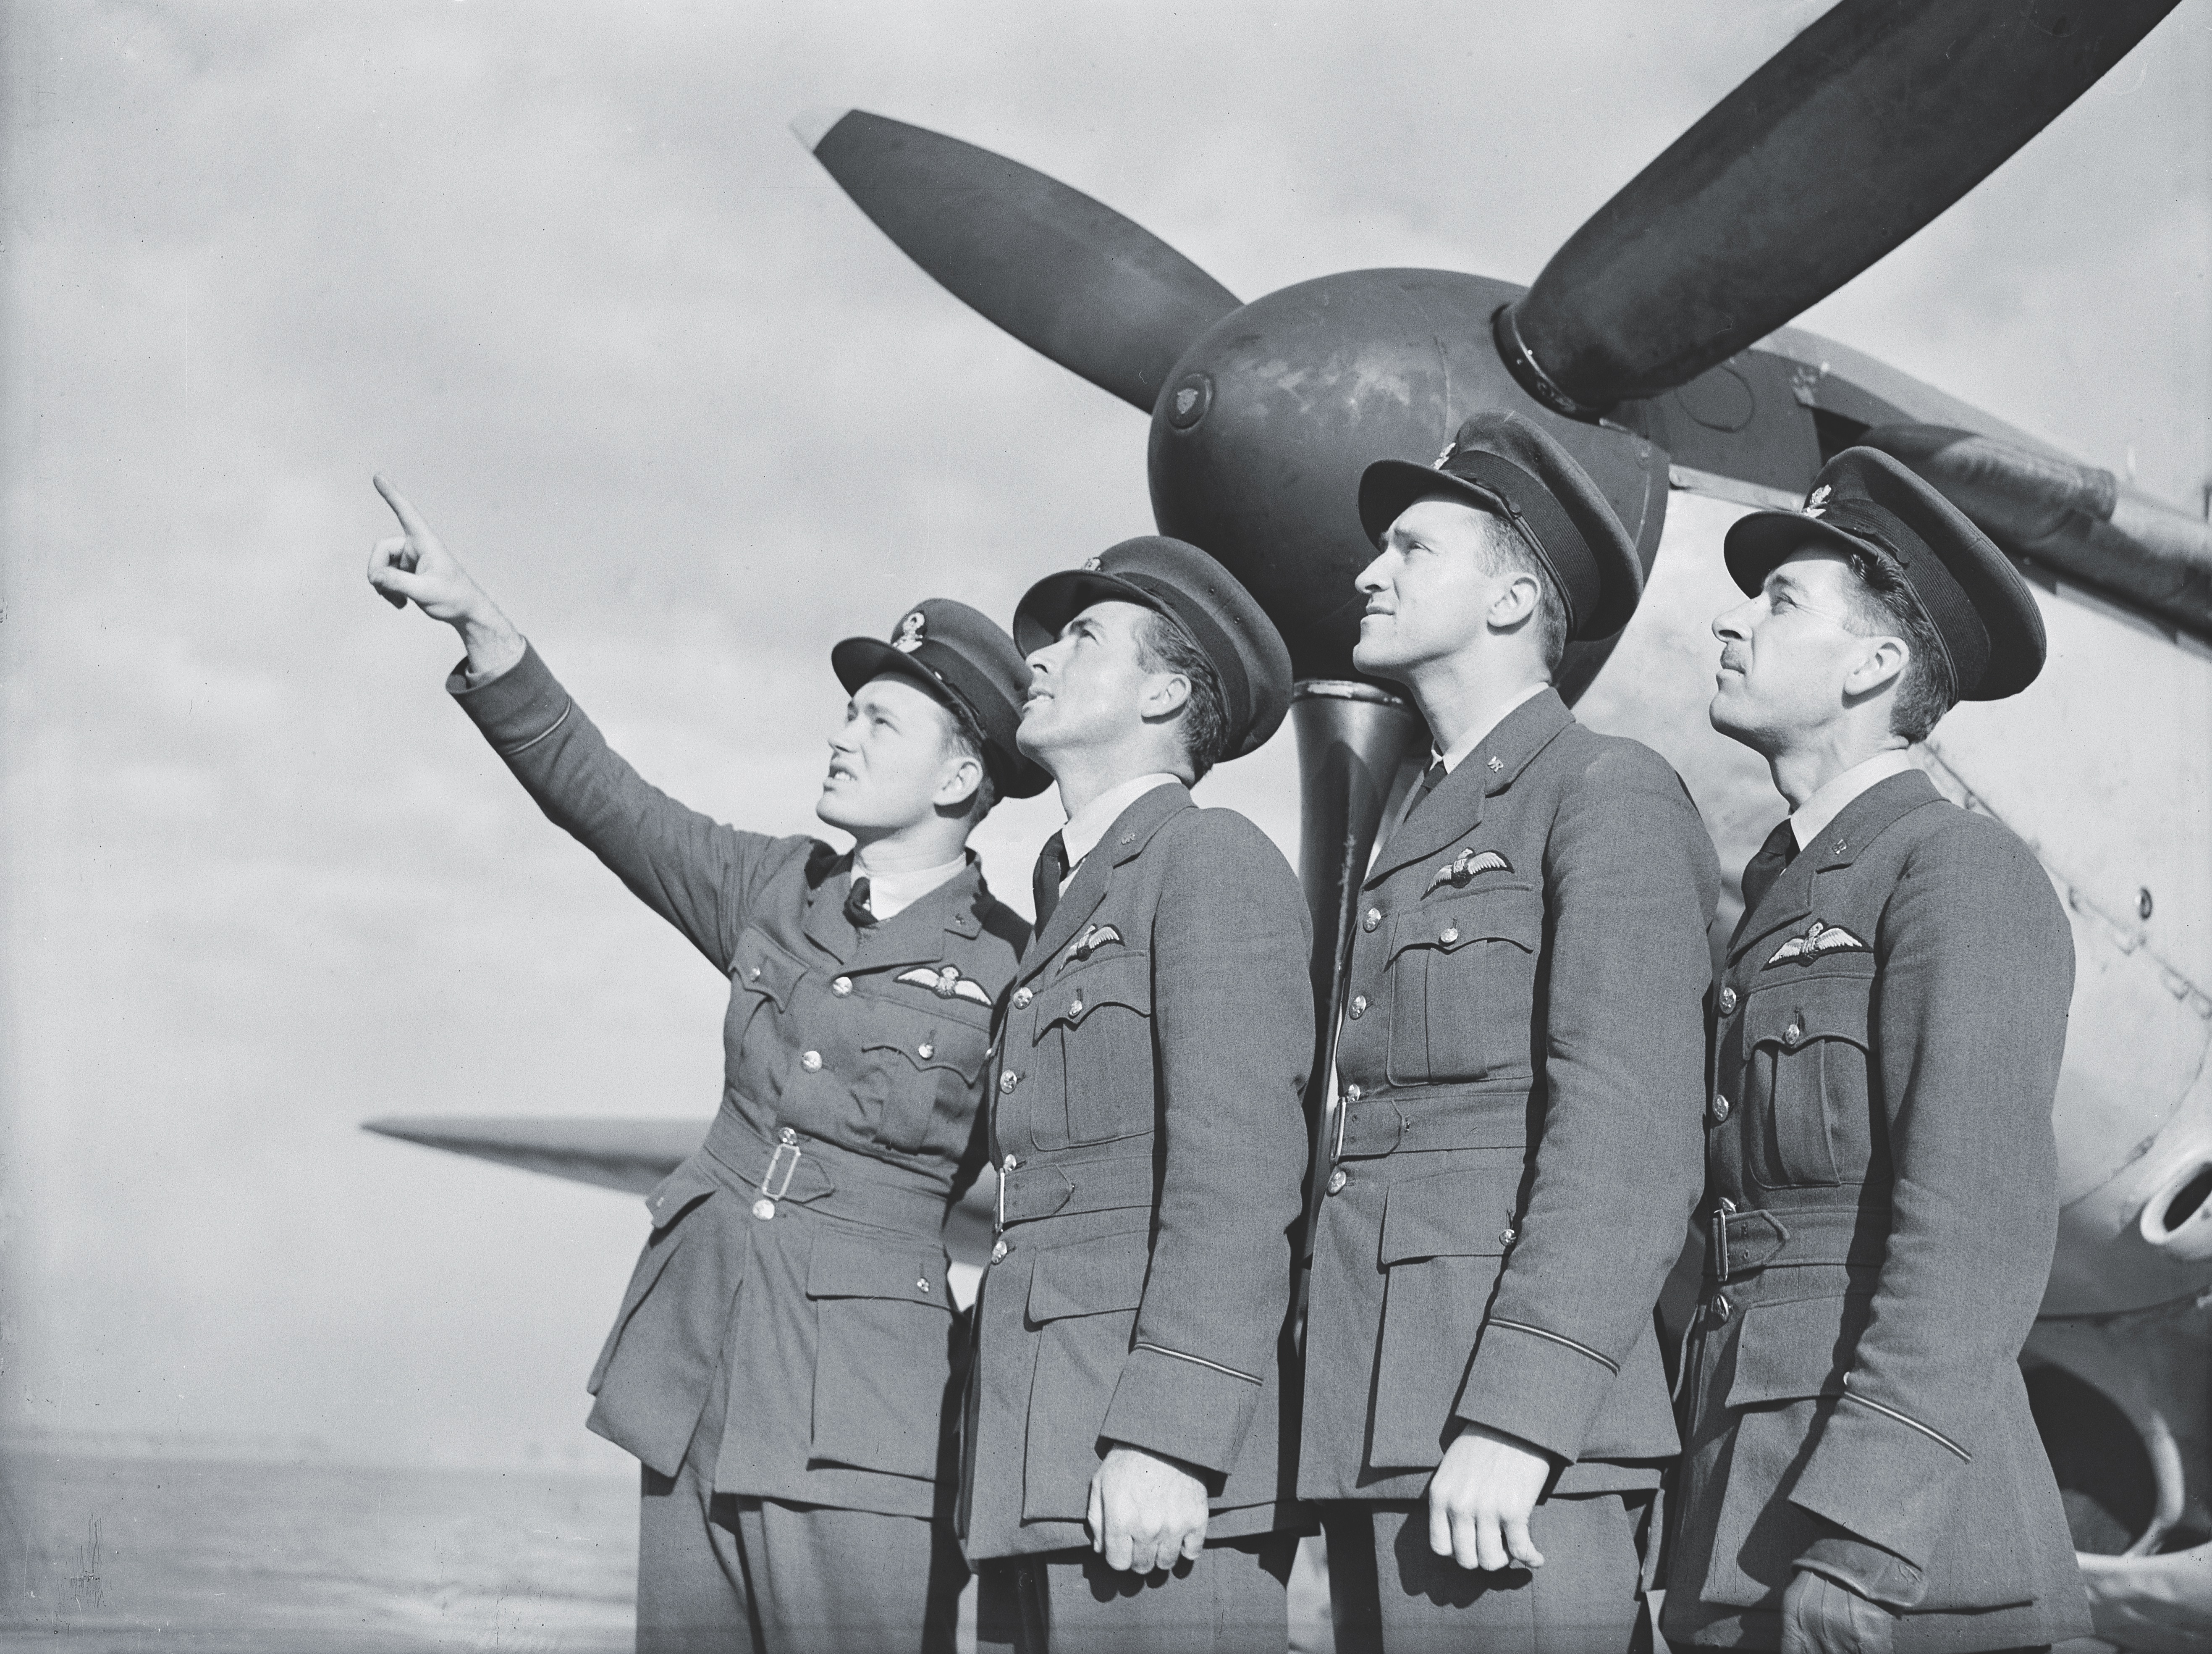 Edwin Orbison, Byron Kennerly, Richard Moore, and James McGinnis at an RAF Flying Training School in England. (Imperial War Museums)